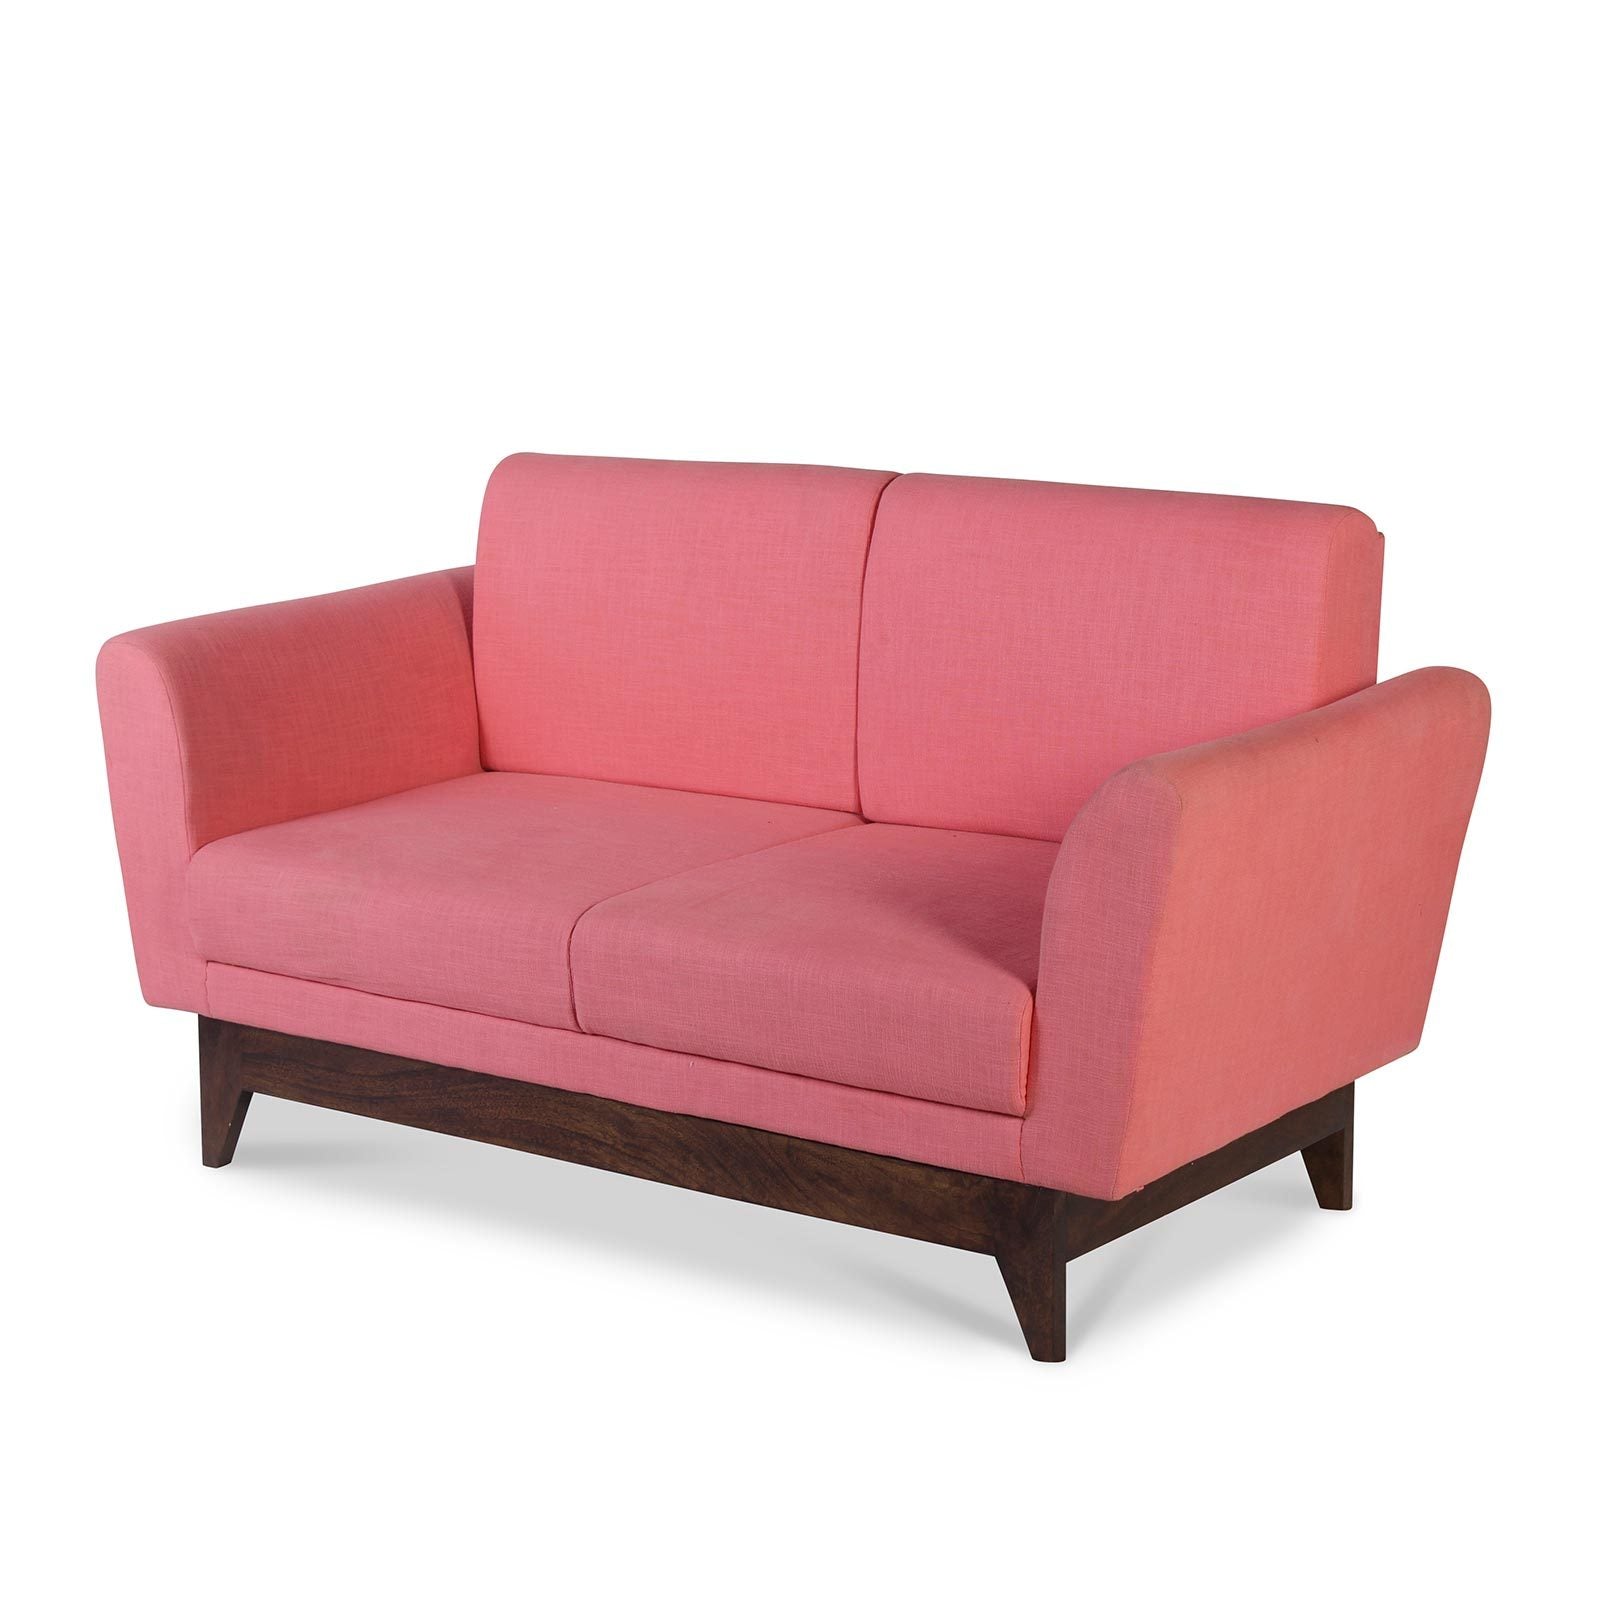 One Seater Sofa sets